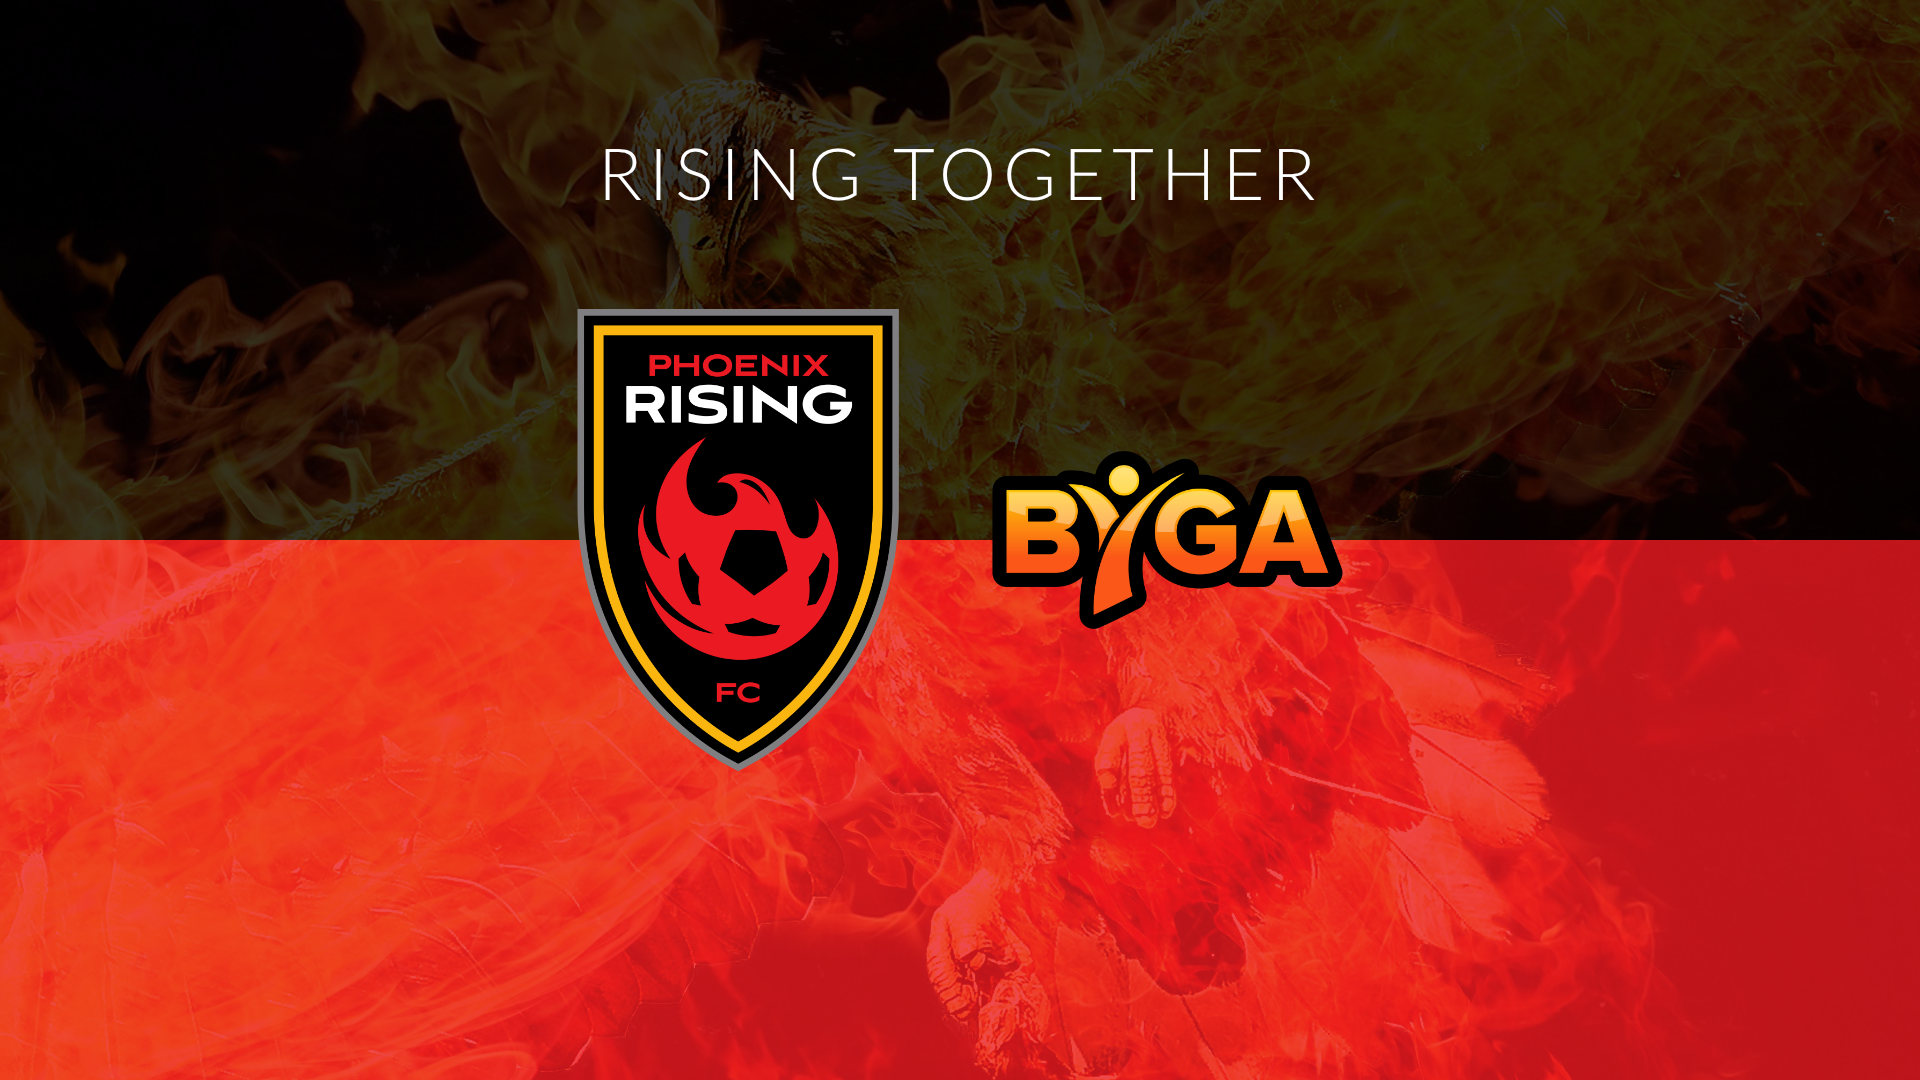 Phoenix Rising FC and Byga enterprise class youth sports club management image